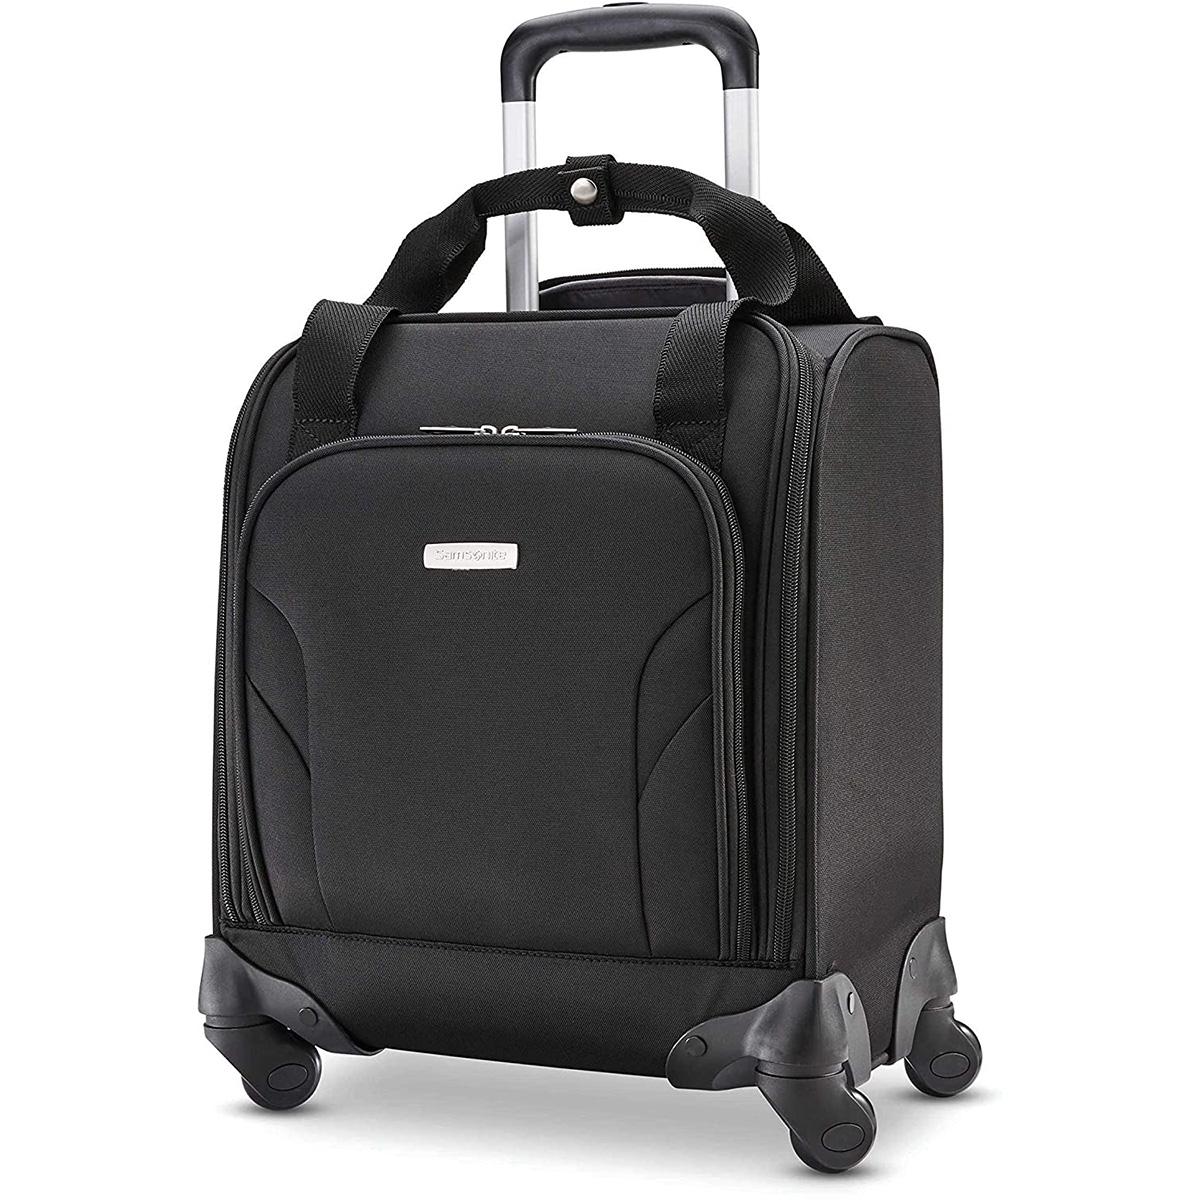 Samsonite Spinner Underseat with USB Port for $32.99 Shipped